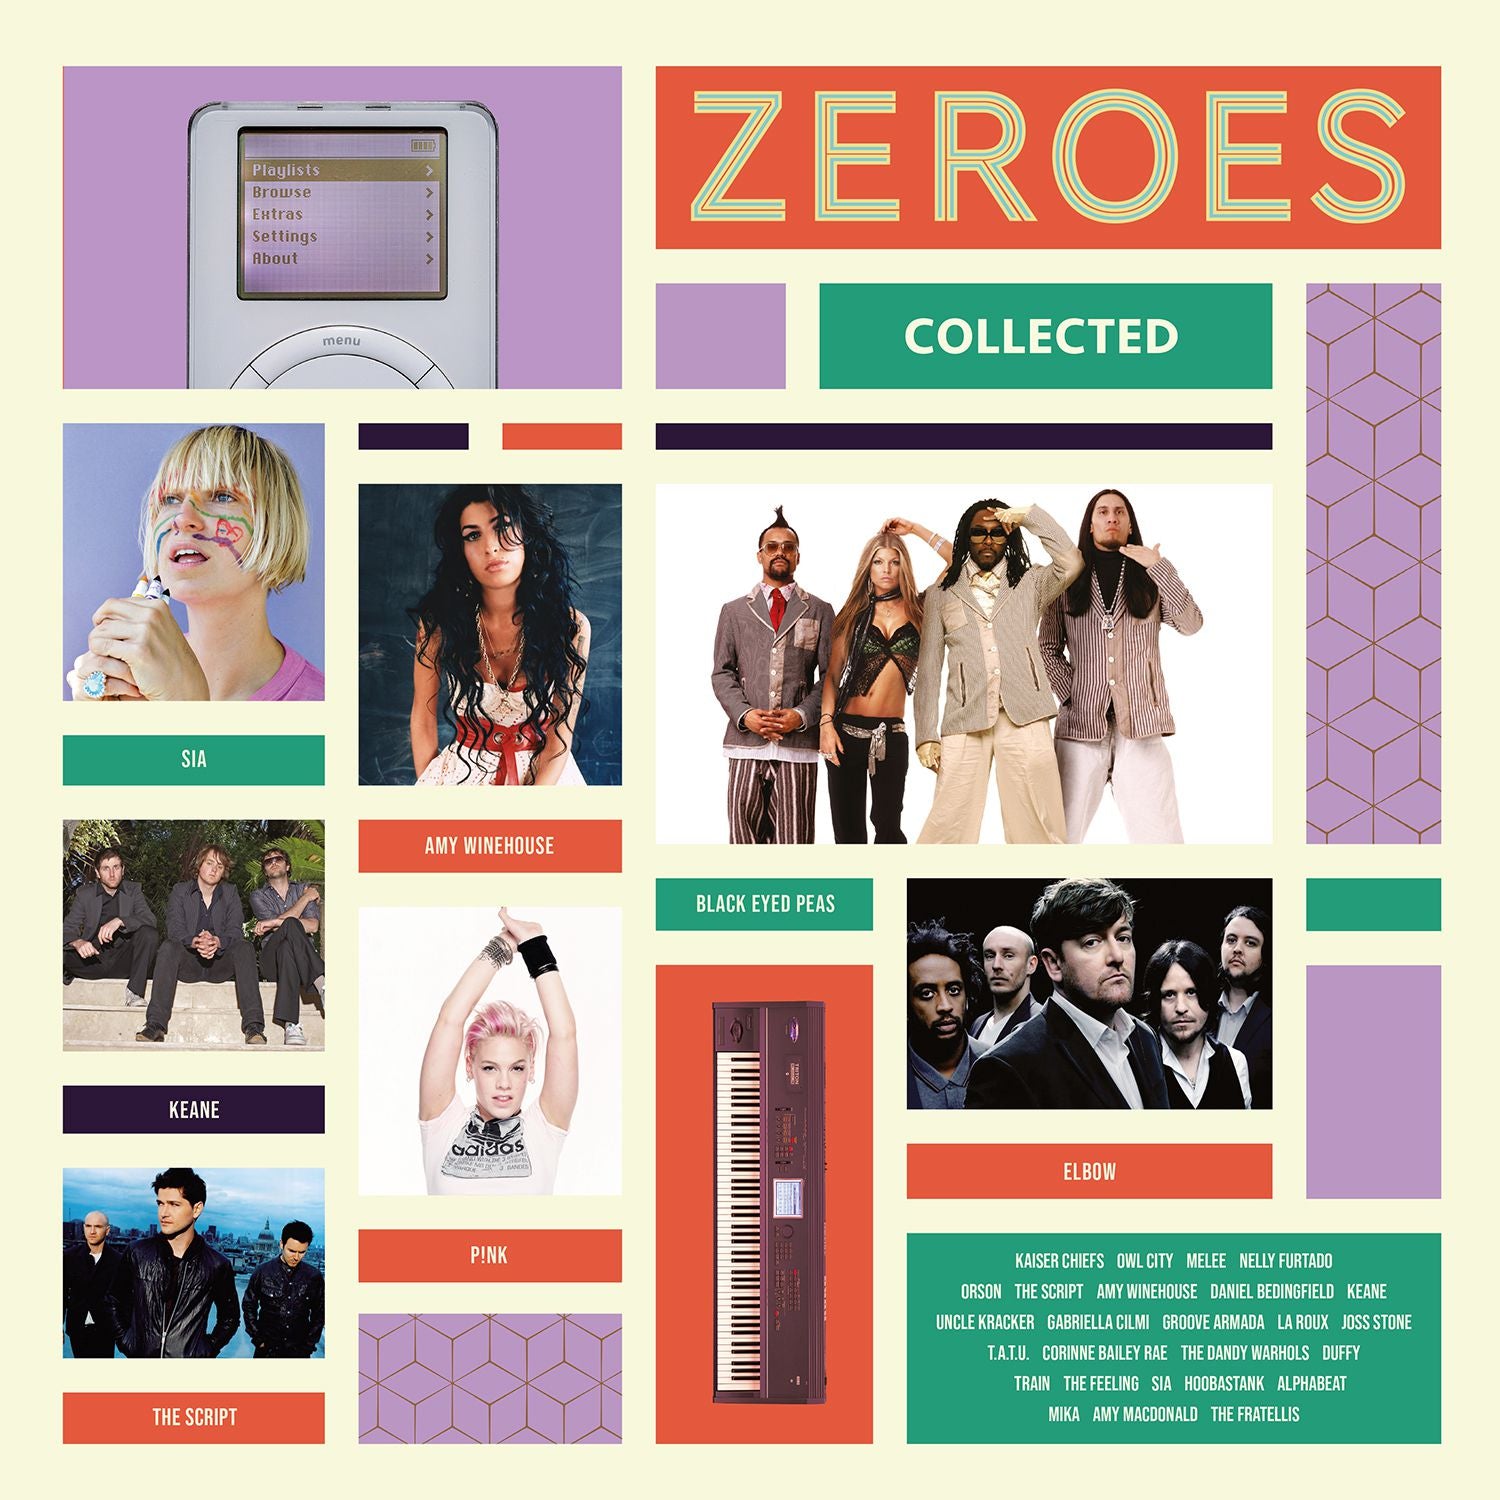 Buy Various Artists - Zeroes Collected (Import, Numbered, Limited Edition 2xLP Translucent Yellow Vinyl)